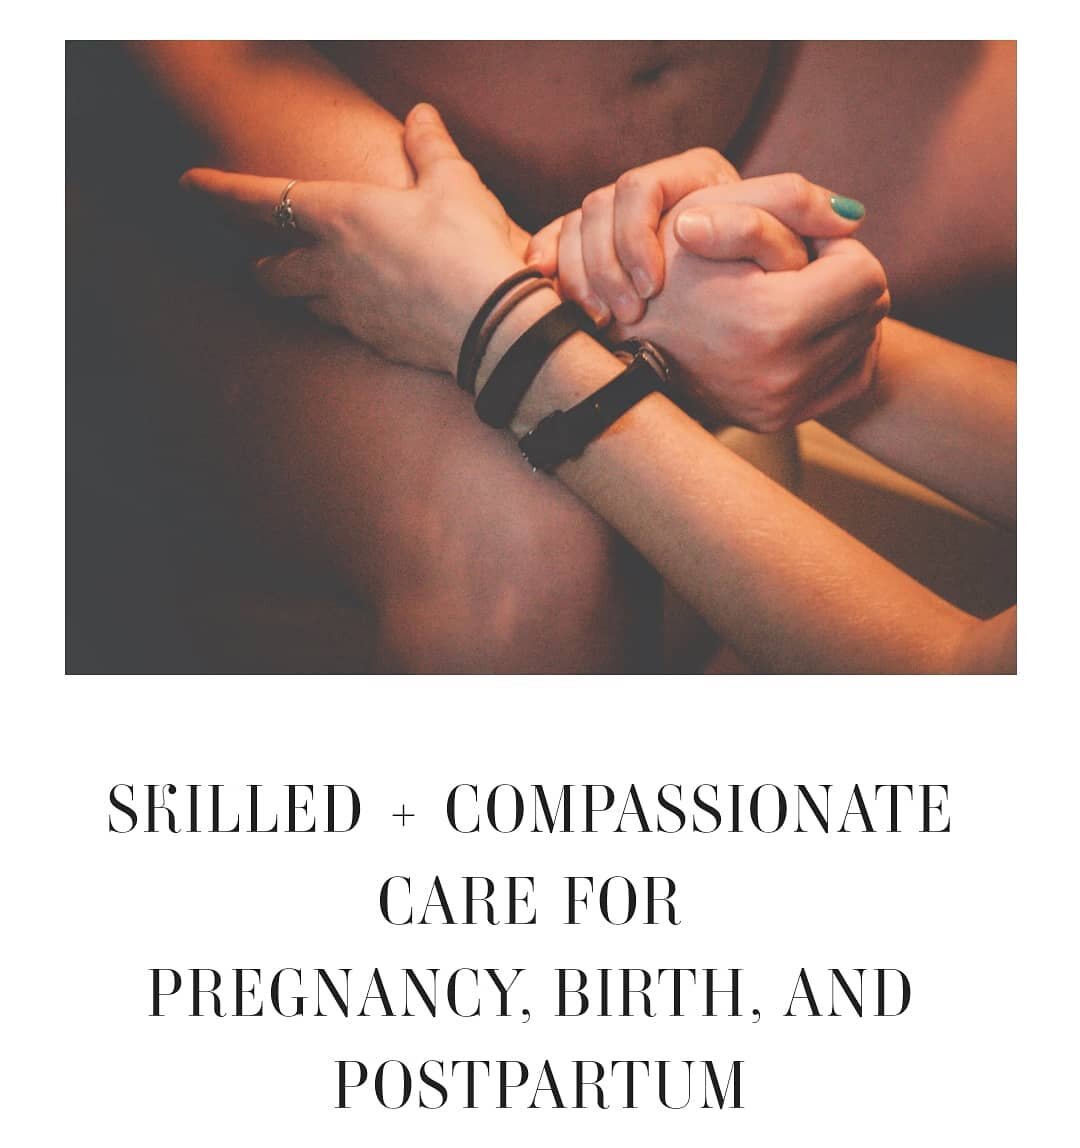 My friends!

Shoutout to @copper_lined for doing the amazing work and revamping my website! The website now has way more information on midwifery care, more fun baby pictures, and continues to be easy to navigate. I am so unbelievably happy with it!
